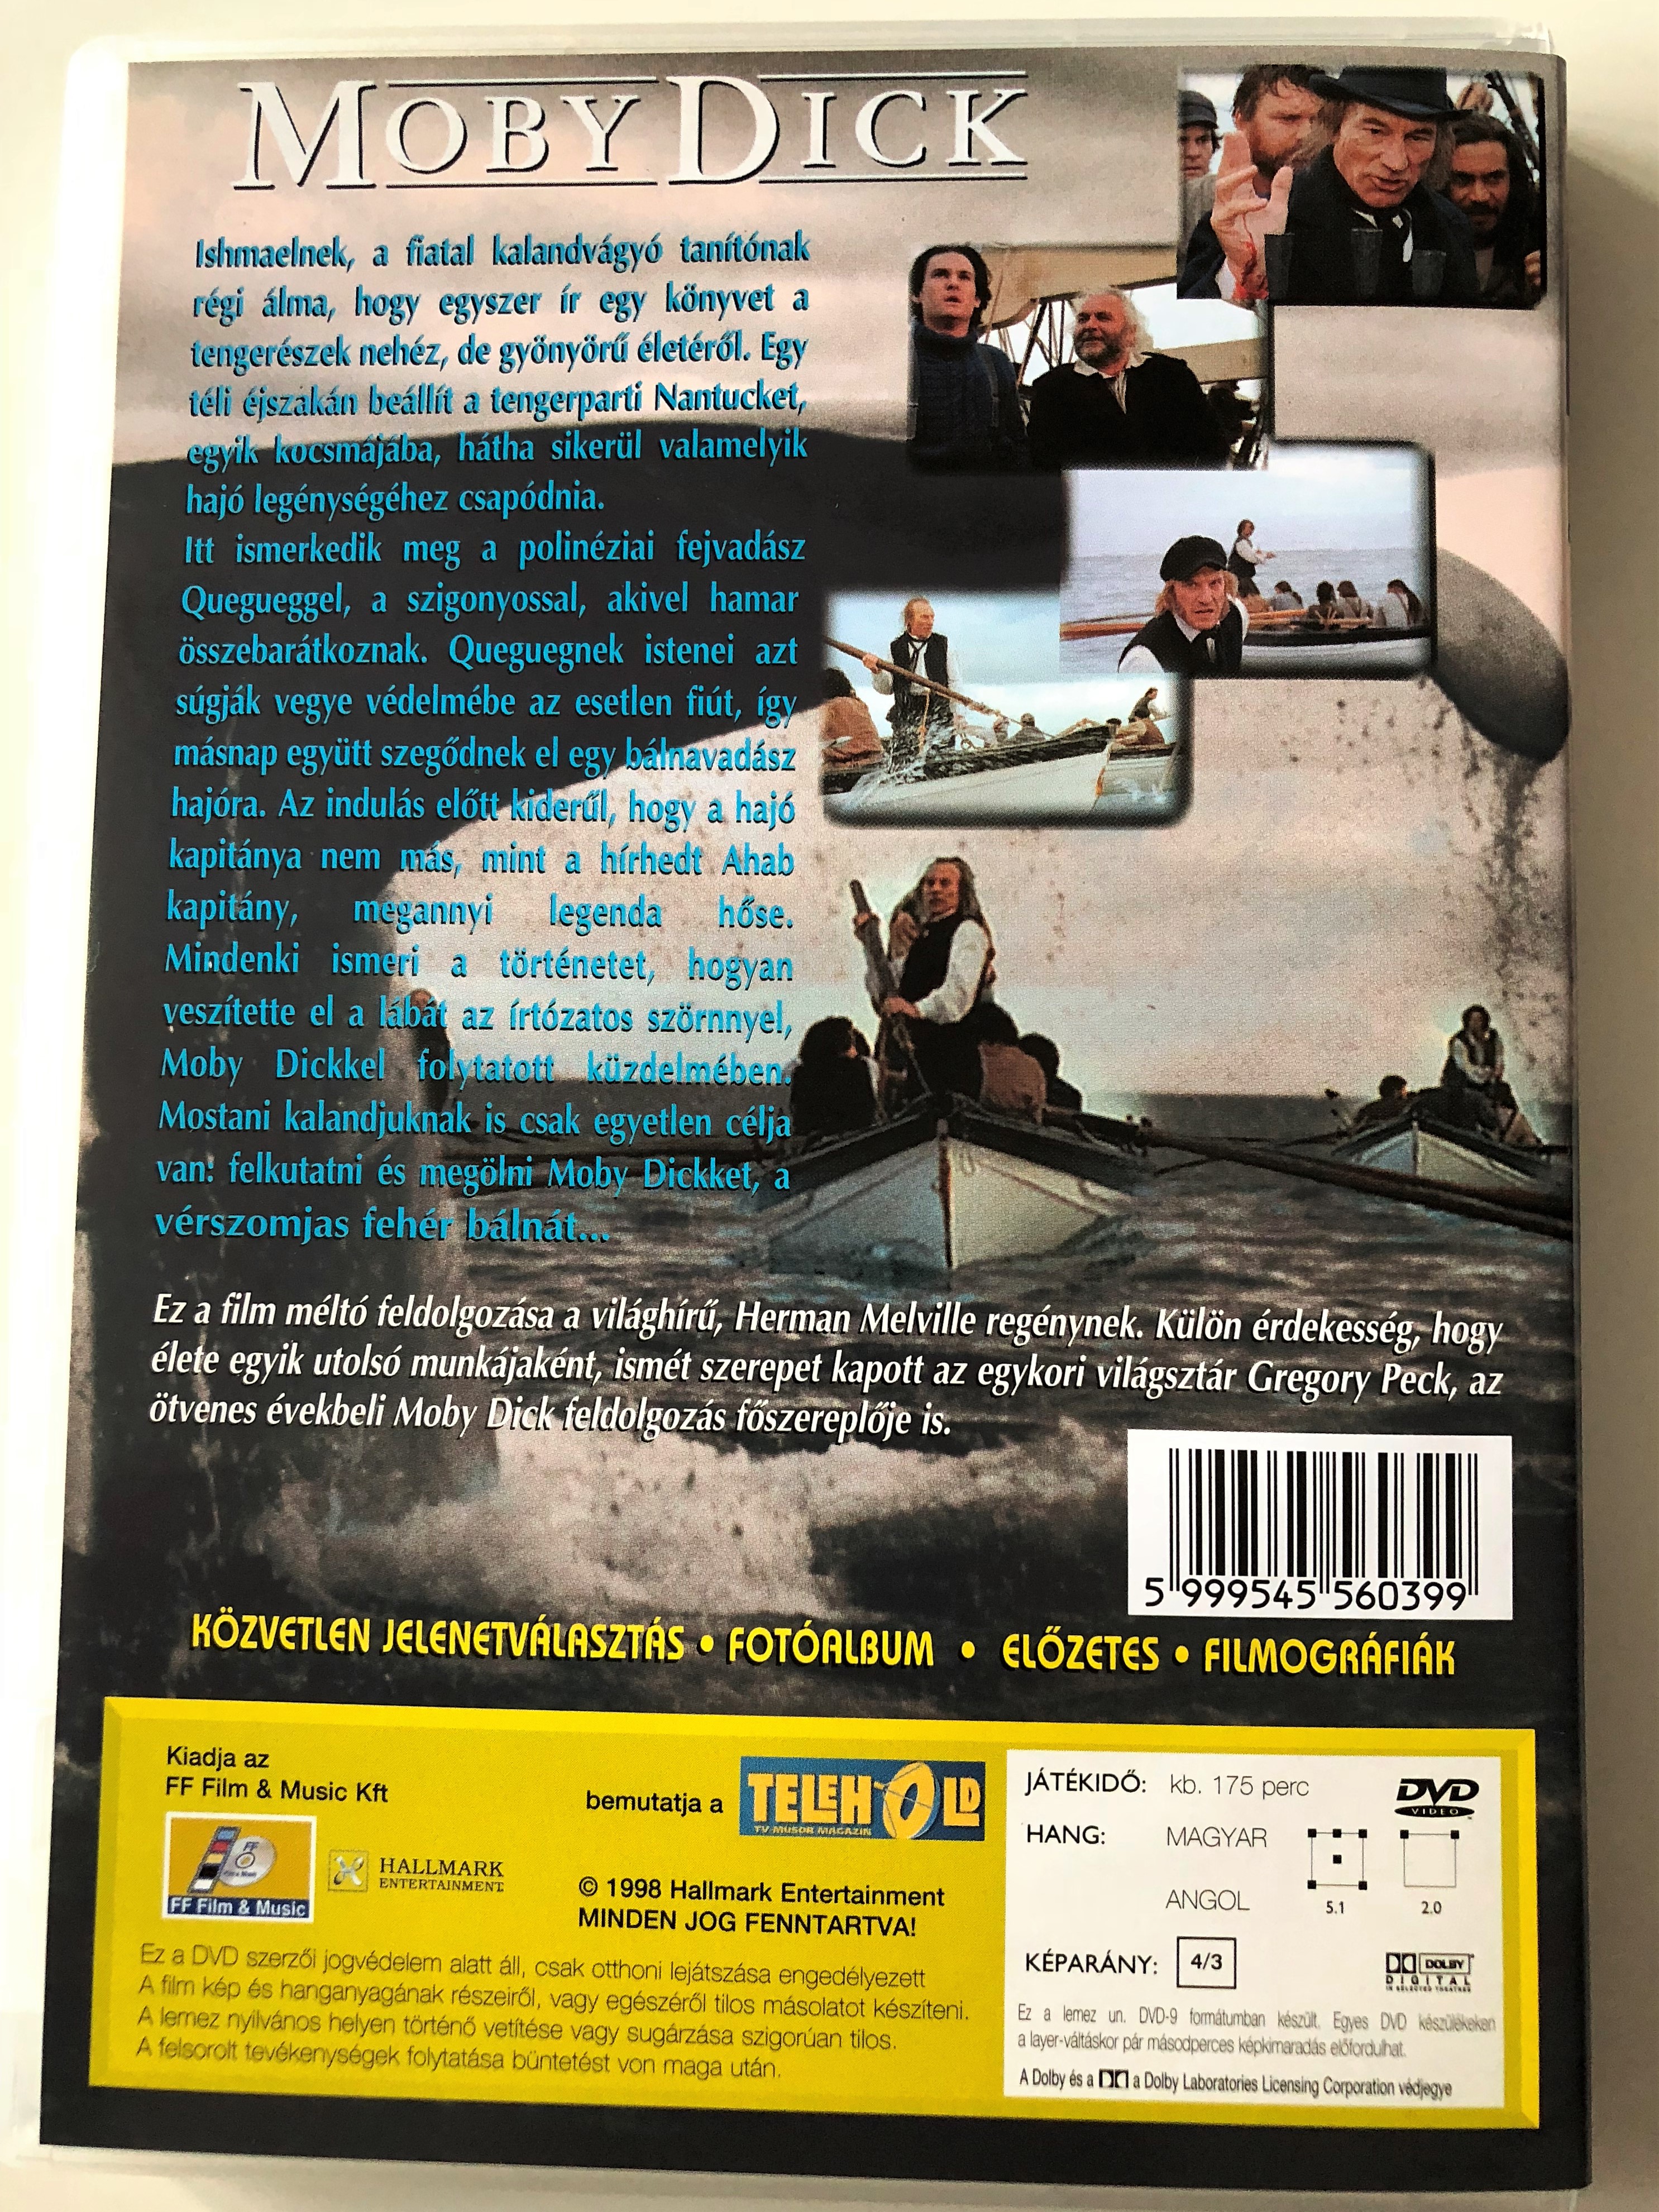 moby-dick-dvd-1998-directed-by-franc-roddam-starring-patrick-stewart-henry-tomas-gregory-peck-produced-by-francis-ford-coppola-2-.jpg